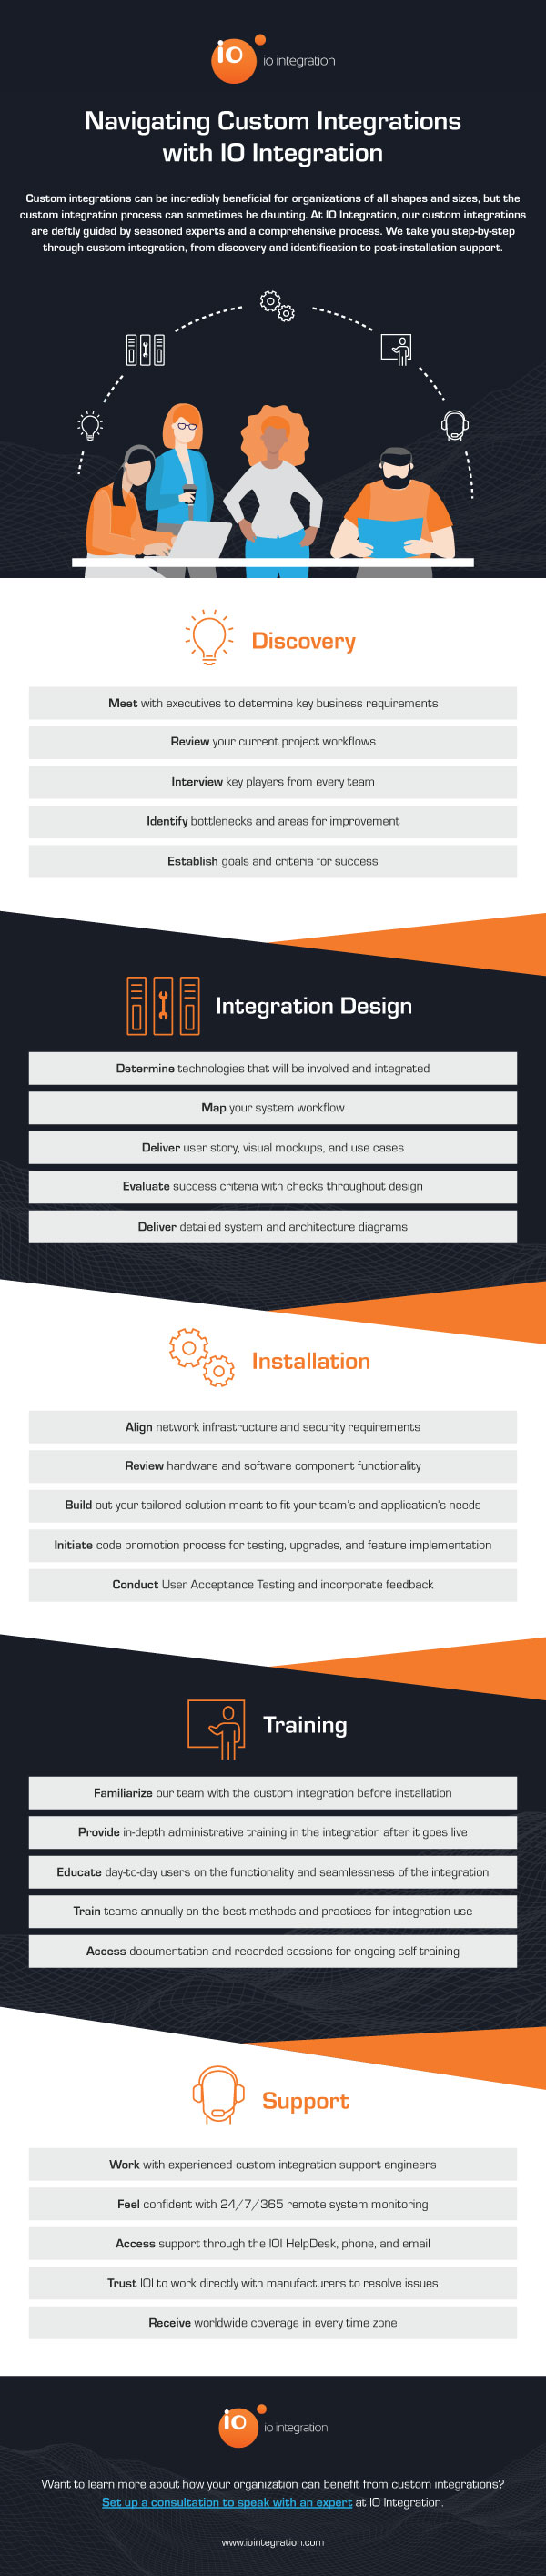 An infographic that explains IO Integration's approach to custom integration services.